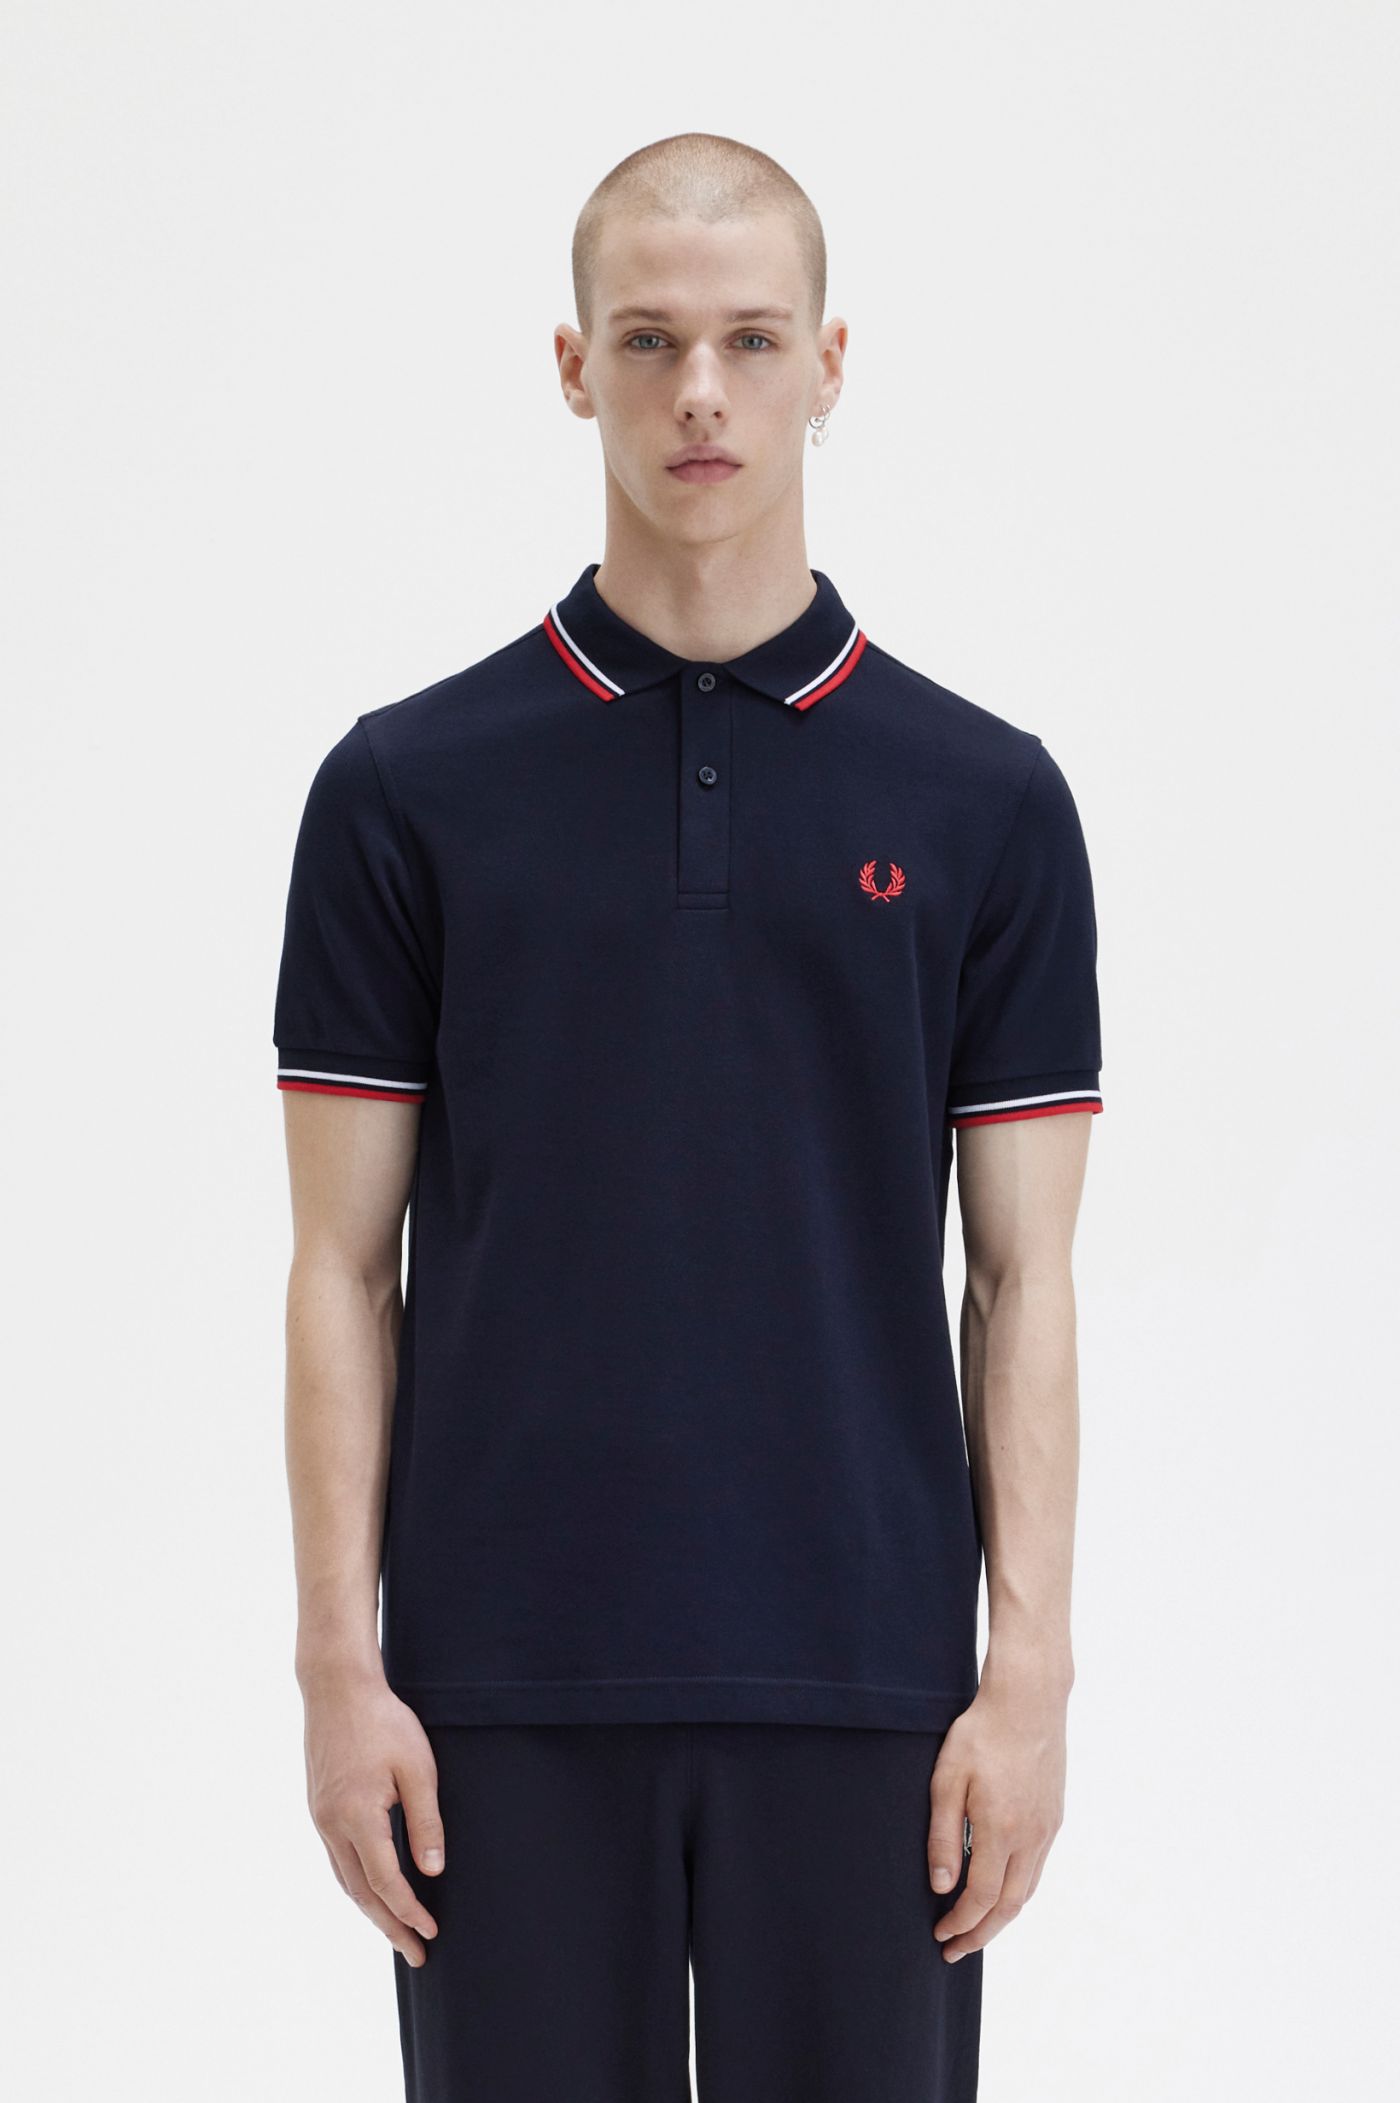 M3600 - Navy / White / Red | The Fred Perry Shirt | Men's Short & Long ...